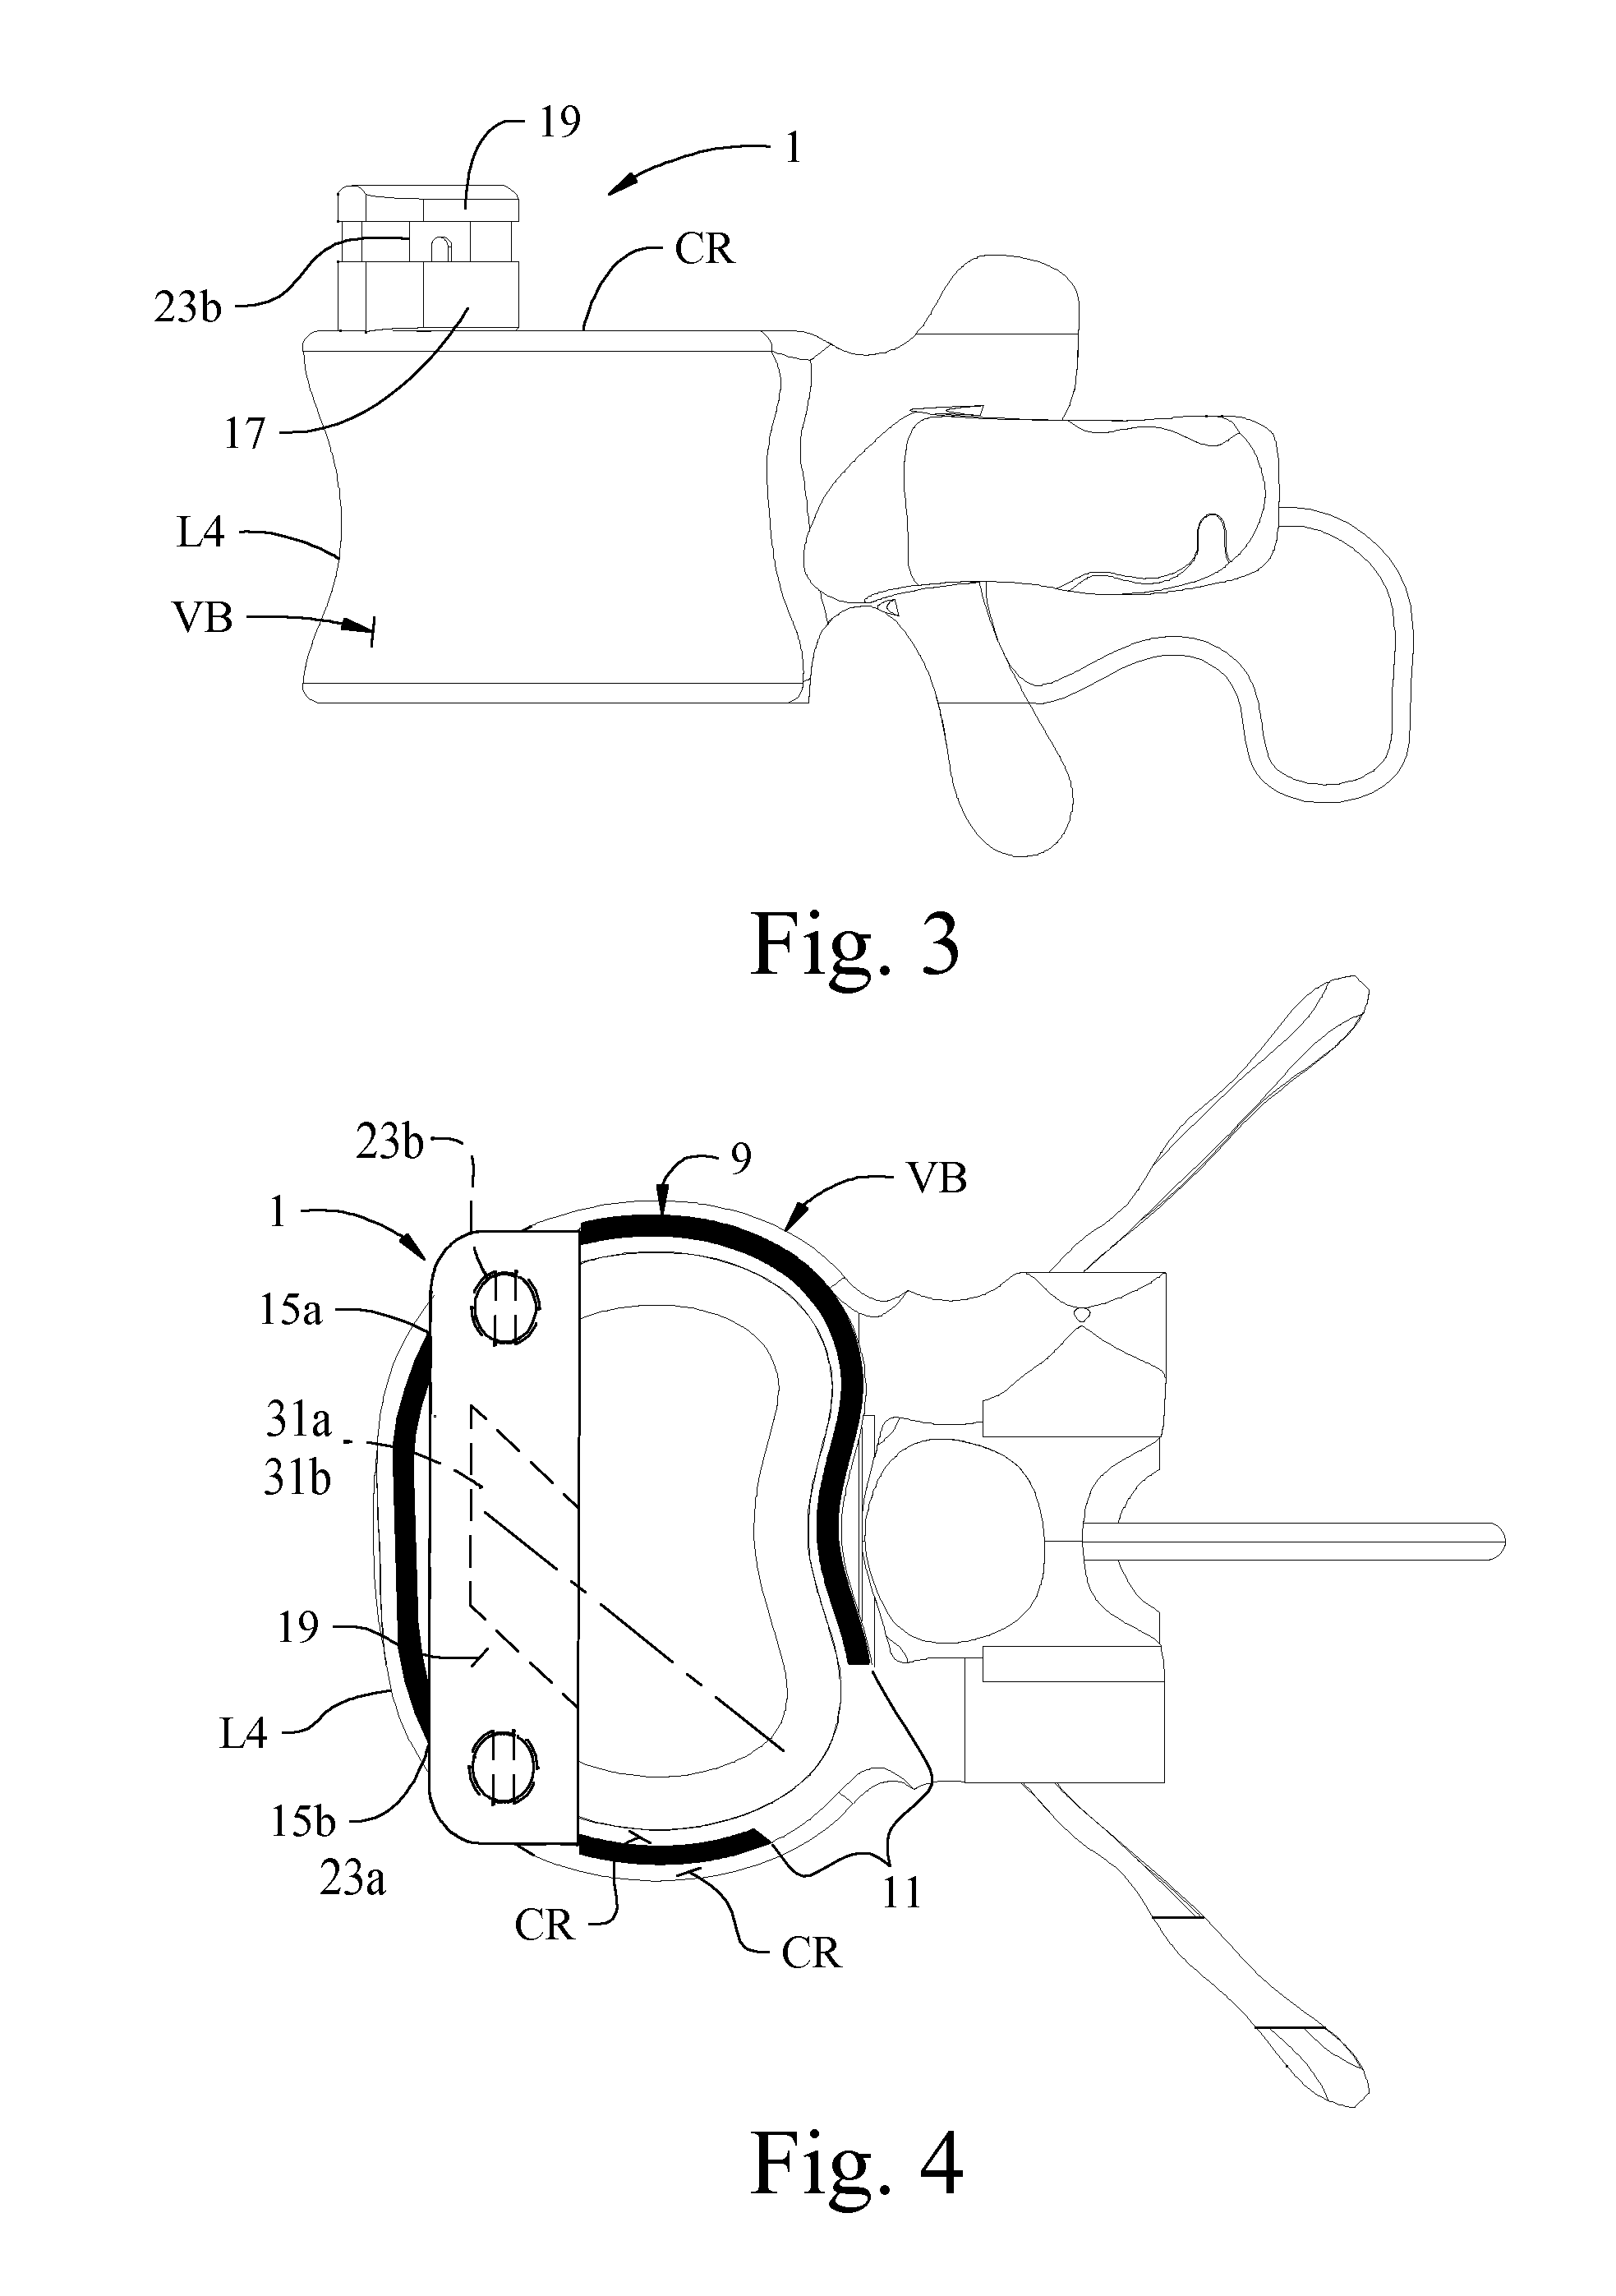 Expandable interbody implant and method